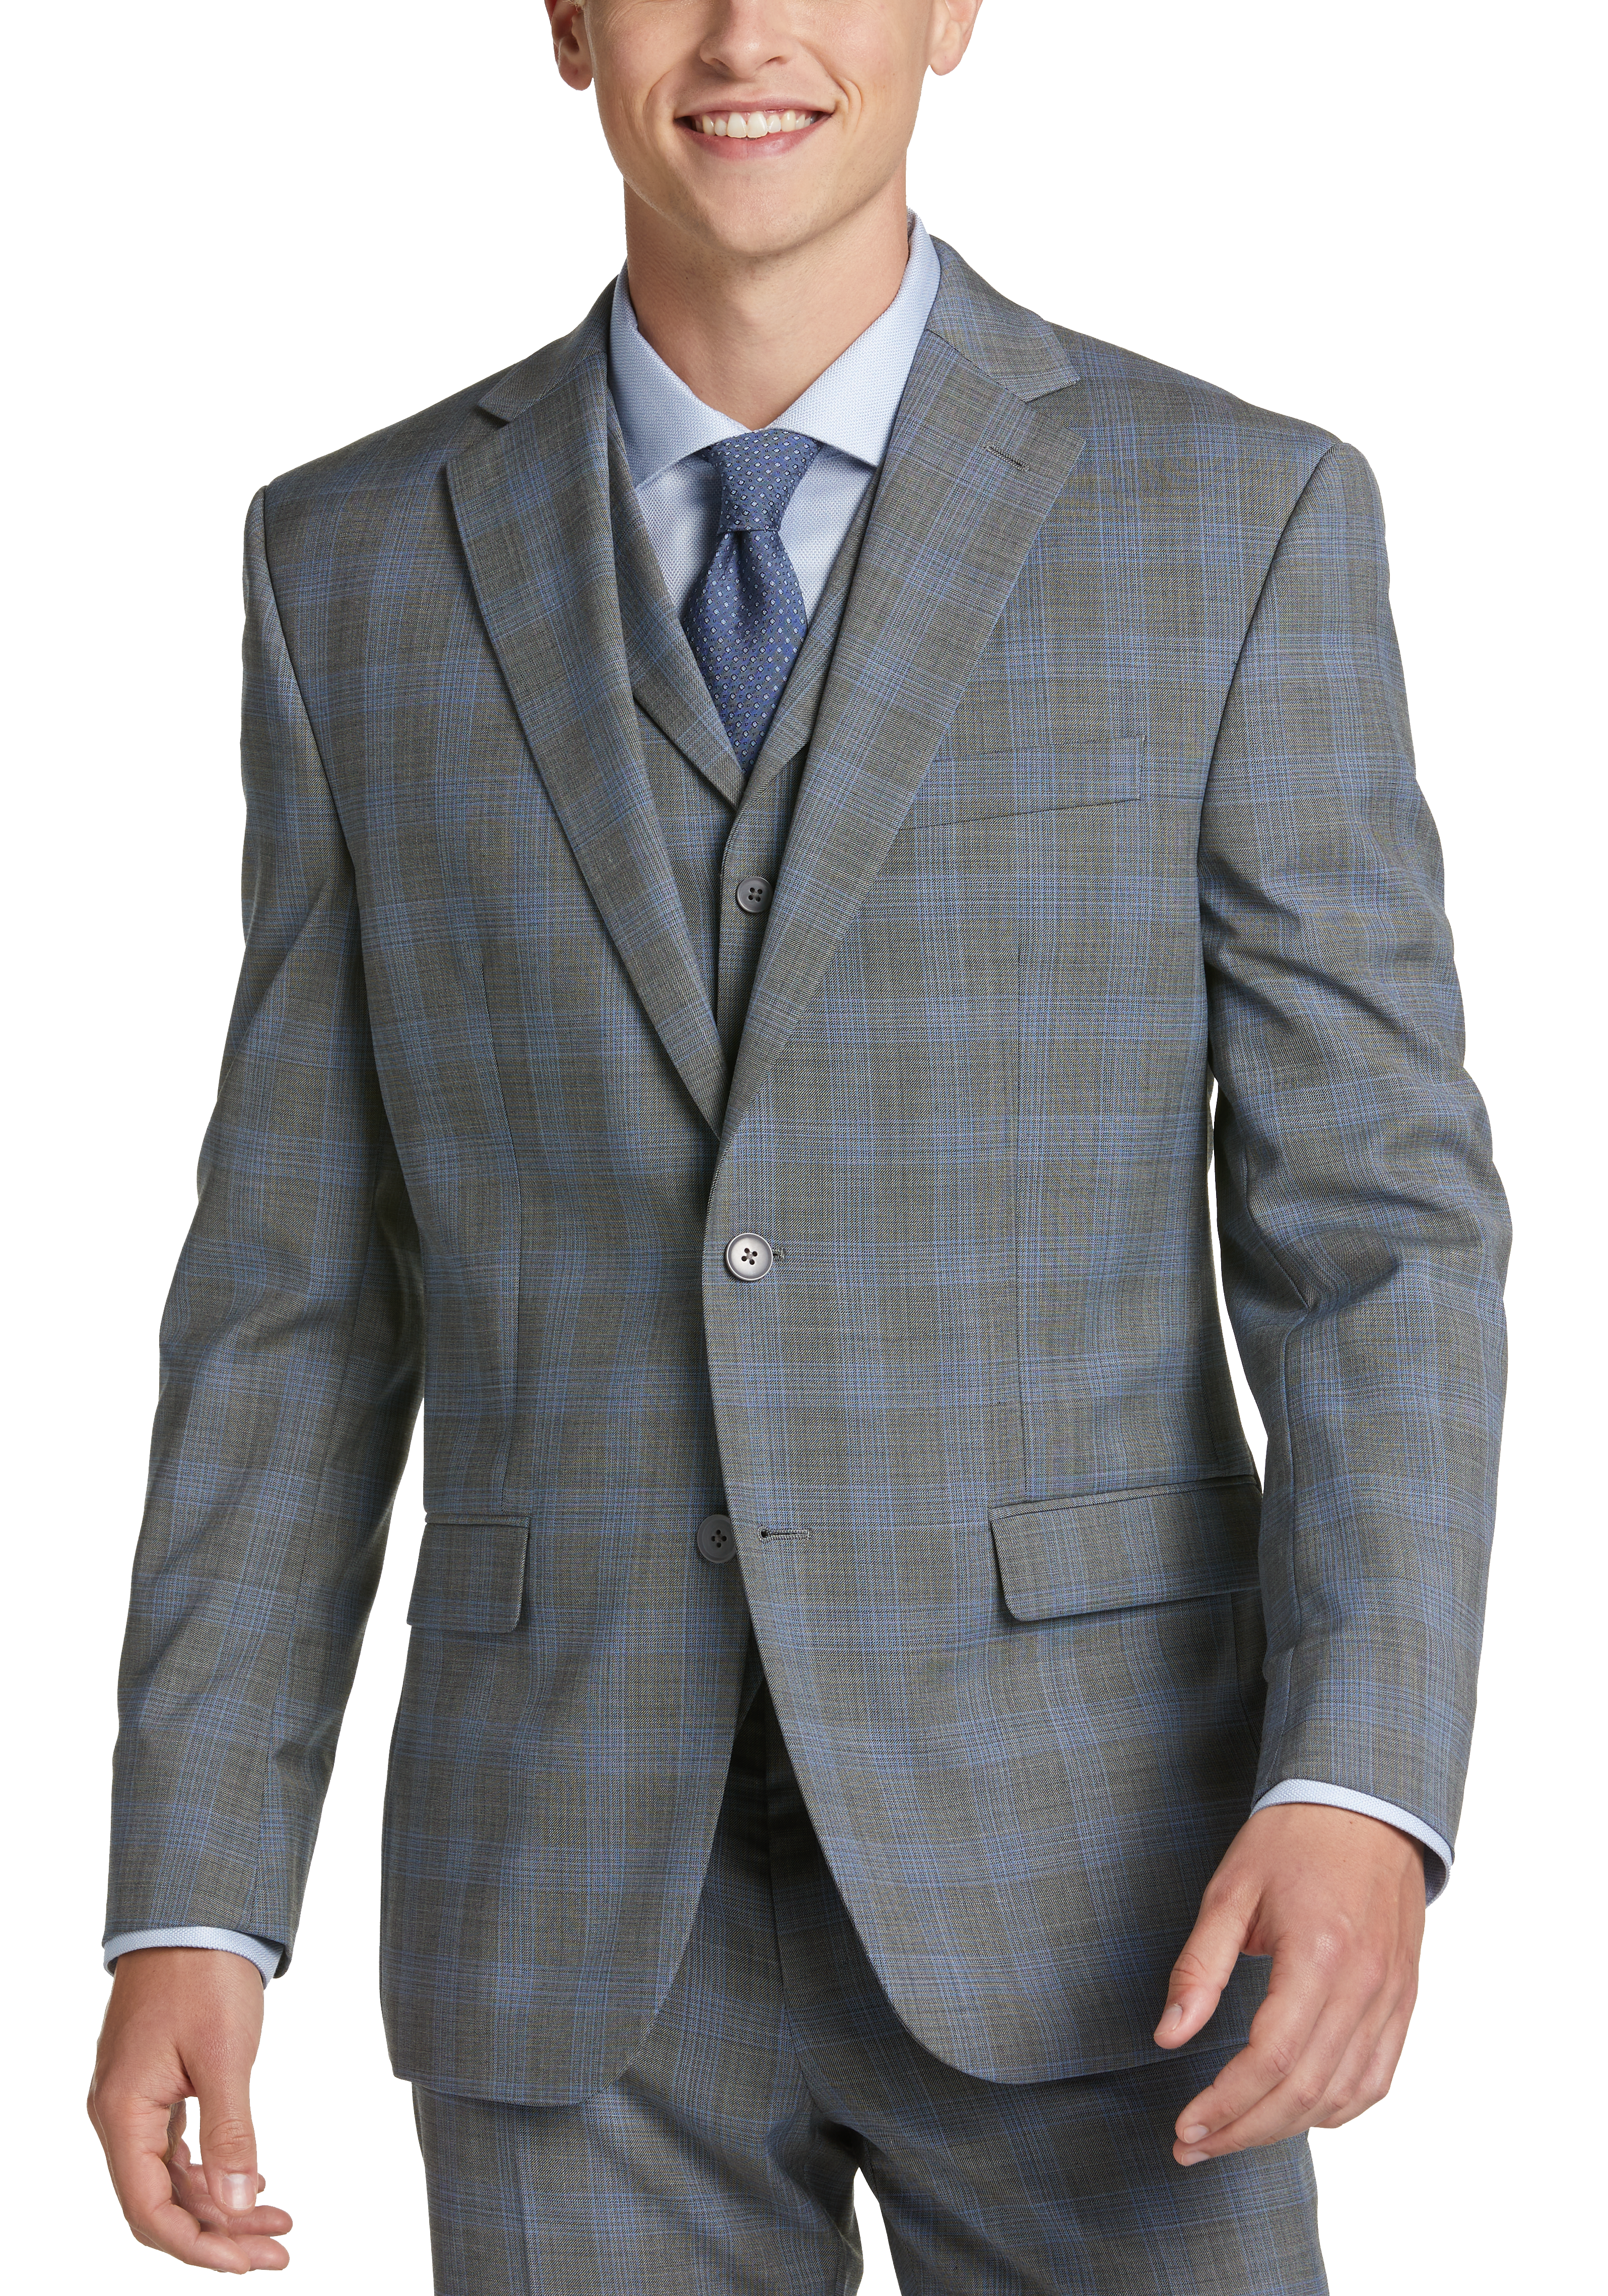 Michael Strahan Classic Fit Vested Suit Gray And Blue Plaid Mens Sale 